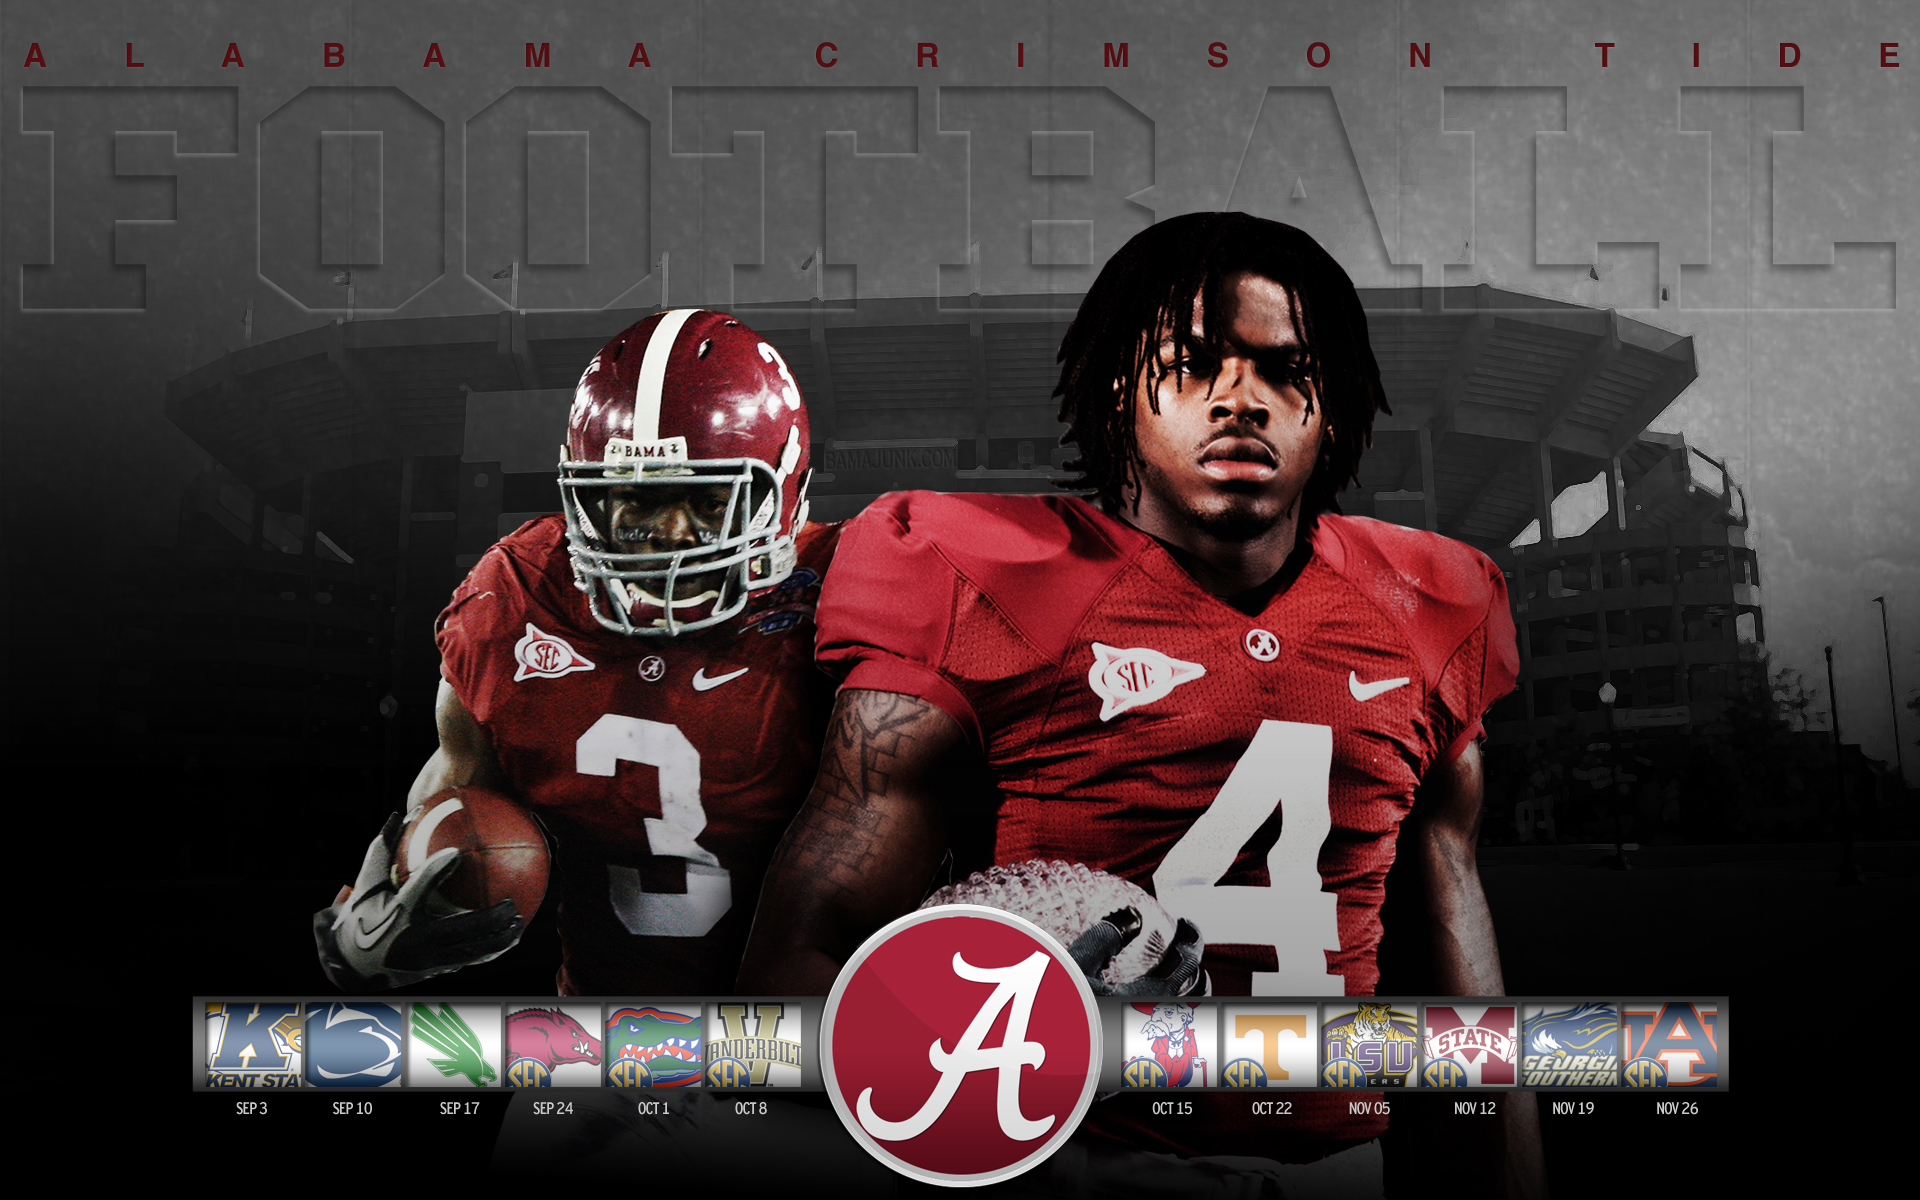 2011 alabama football schedule   reviewed by BBT 5 times rated 46